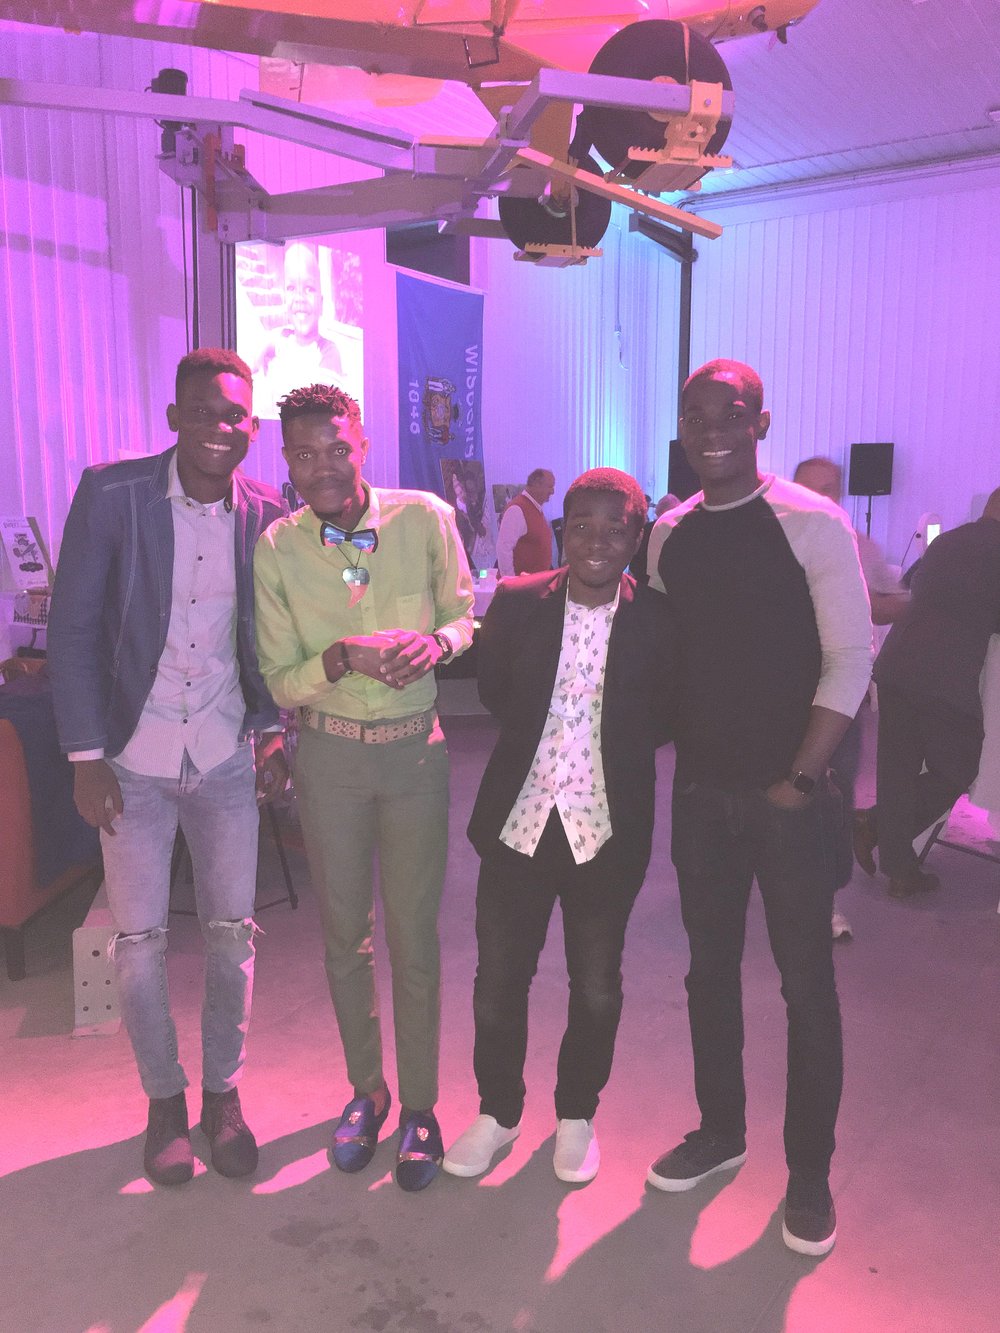  From L to R: Sassy, Wilso, Remy and Swenson. All four are from Haiti and currently in the U.S. for school. This is at a fundraising event in Madison, Wis. for an orphanage in Fond Blanc, Haiti.  